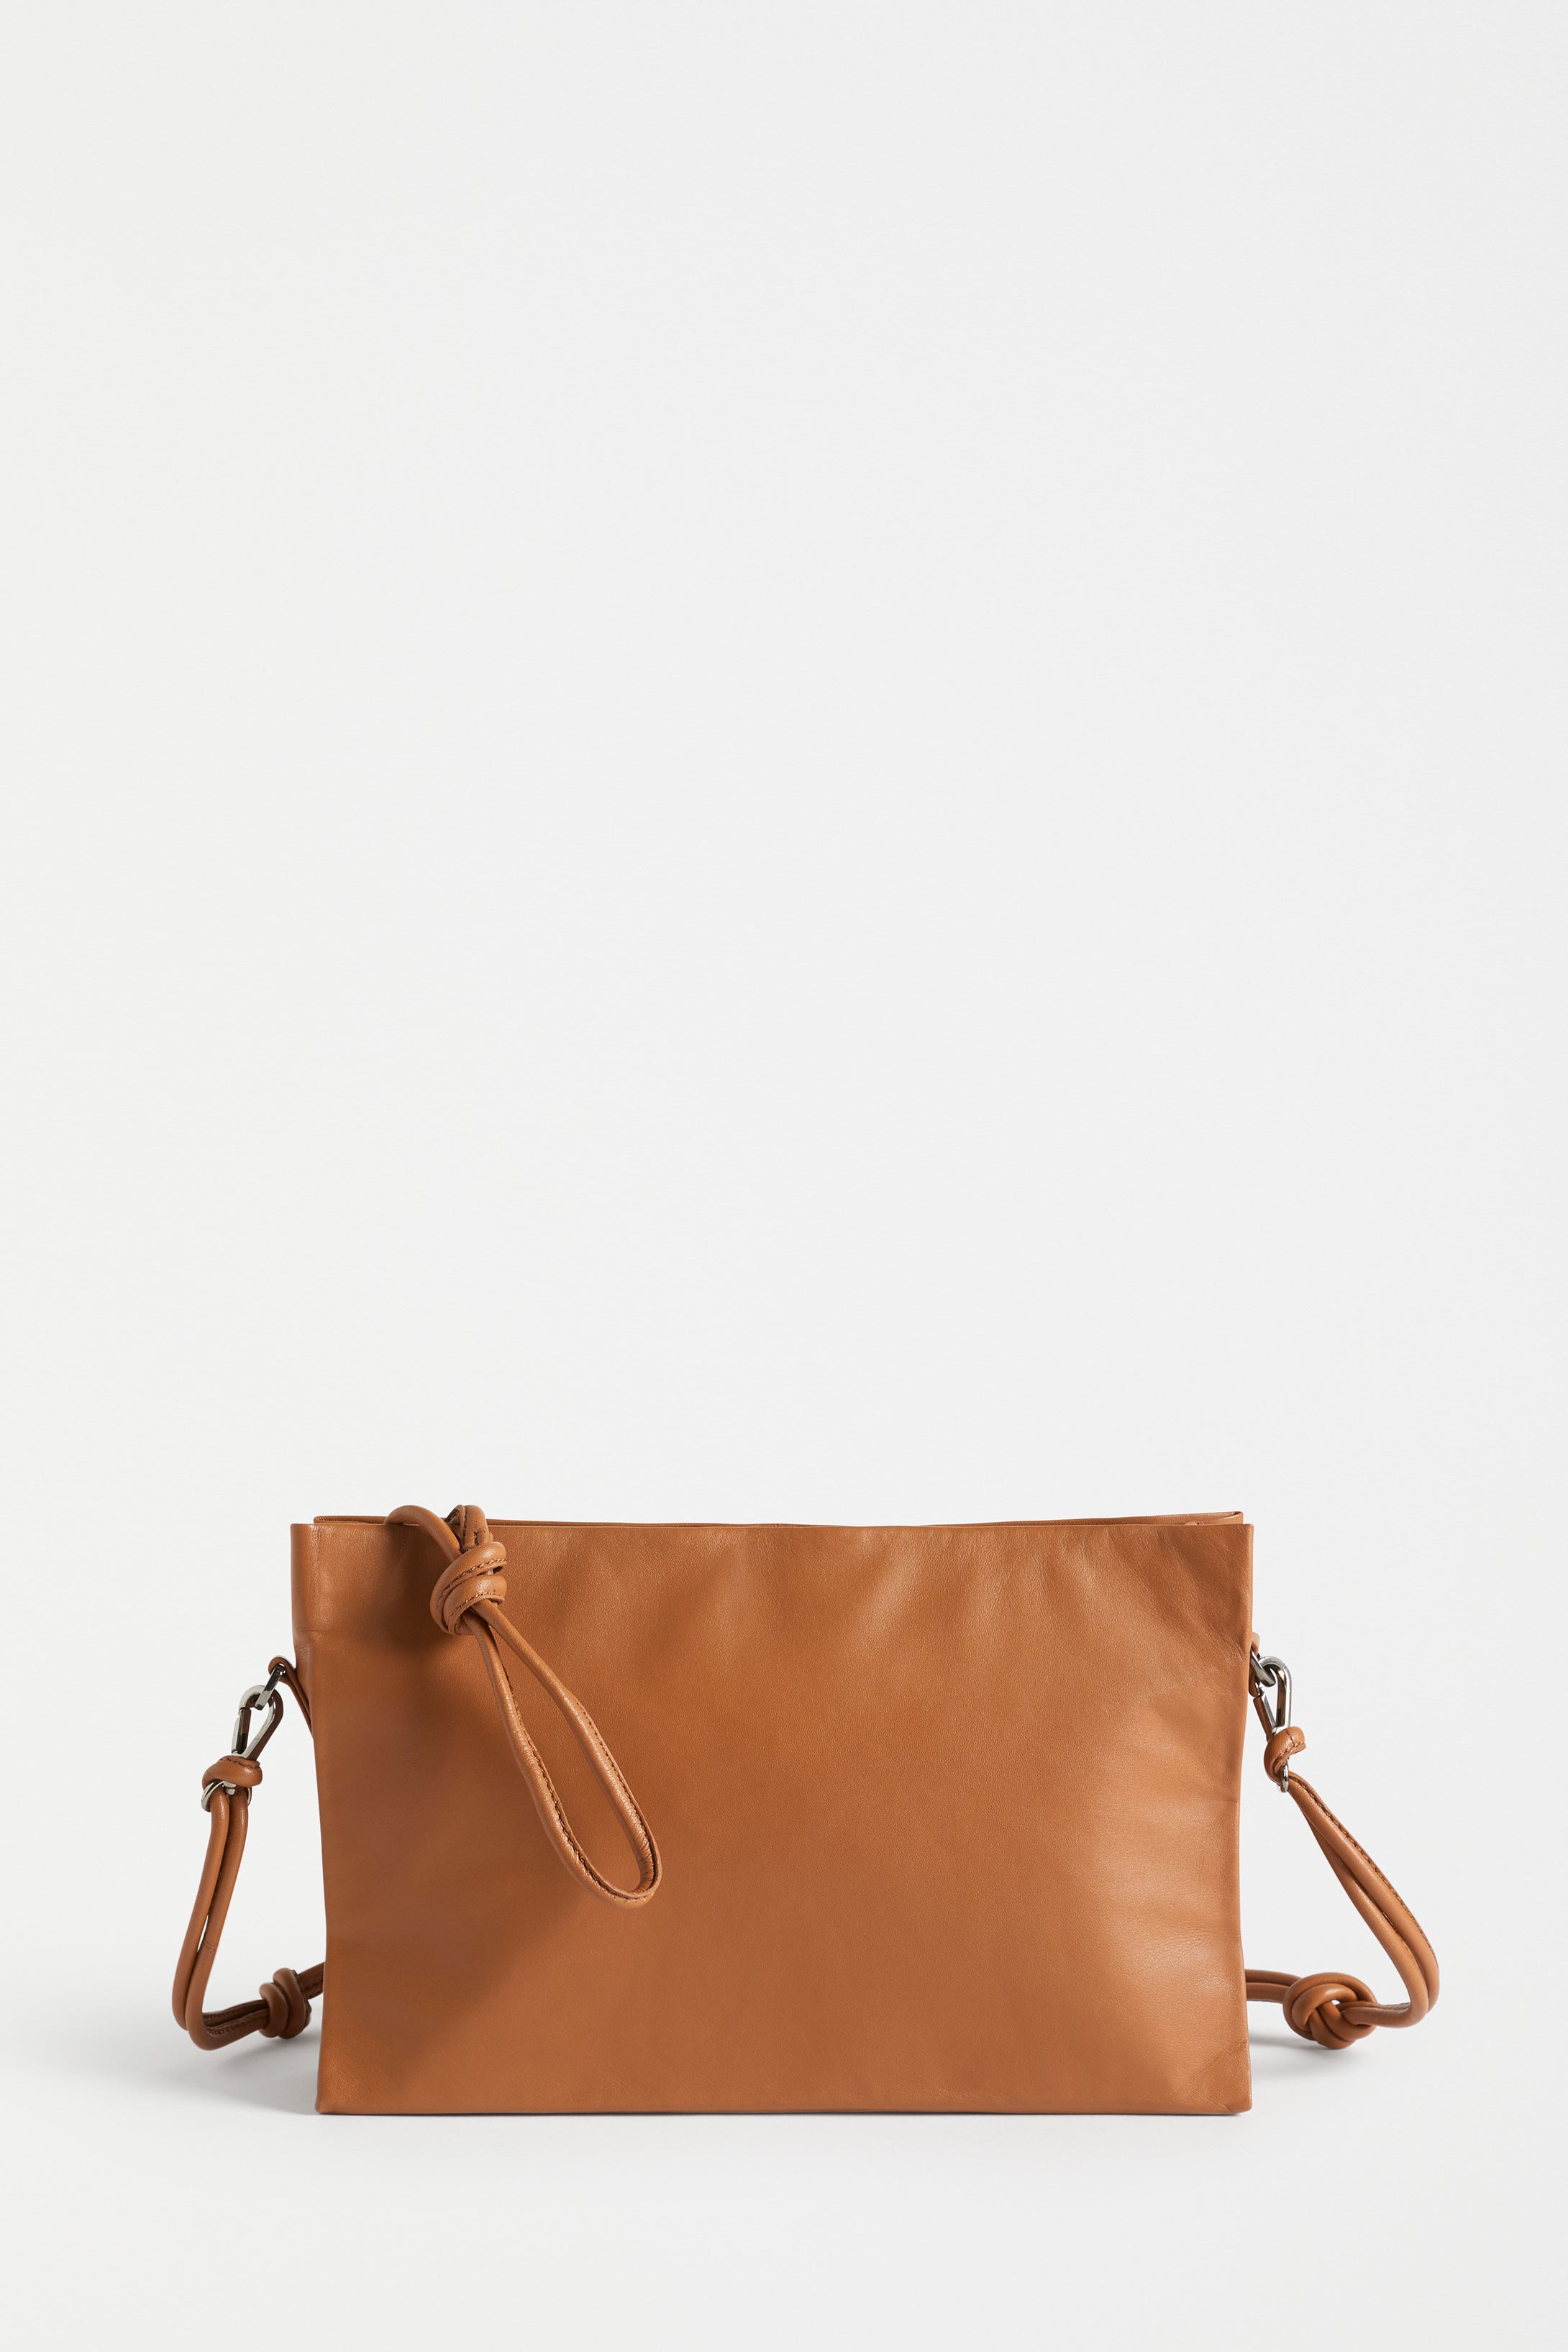 Malte Small Leather Cross Body Bag with Knot Detail Front | TAN